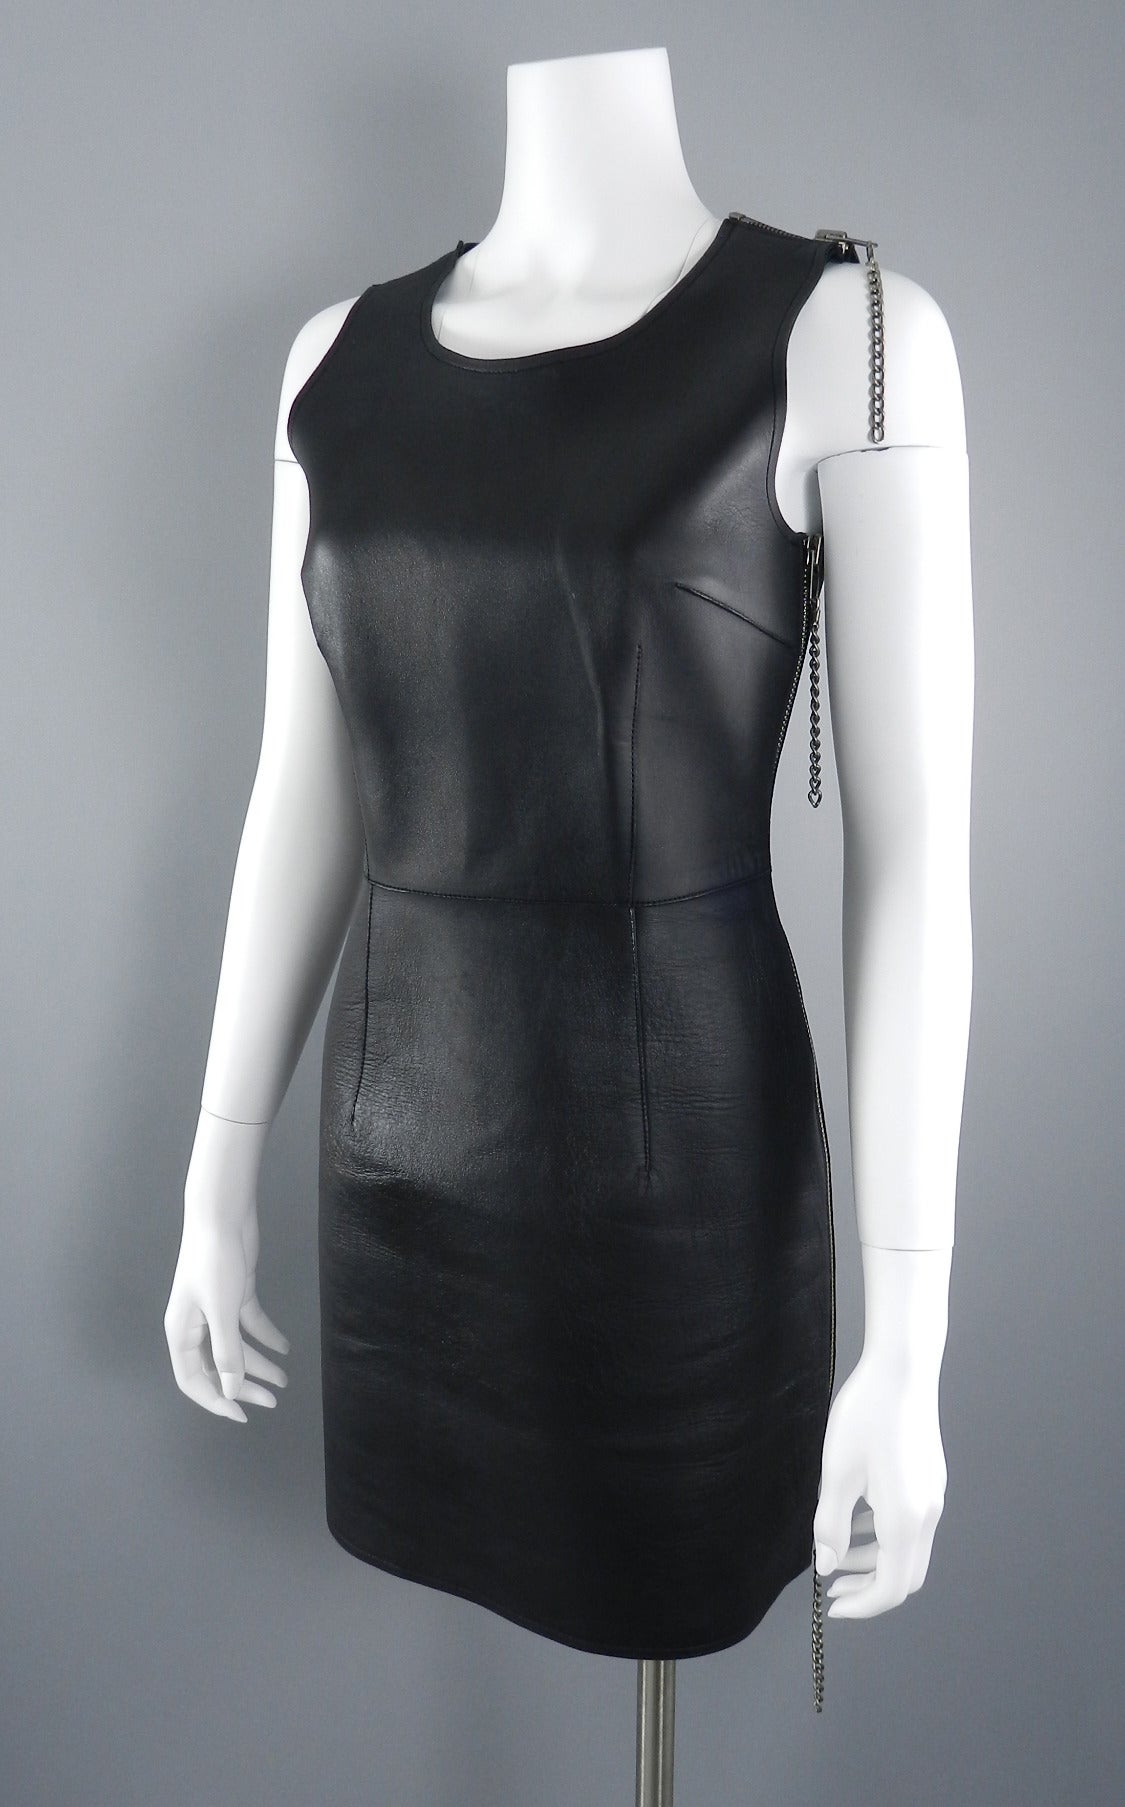 Maison Martin Margiela black leather tank dress with metal zipper at left side and shoulder. Tagged size IT 42 (USA 6). To fit 34